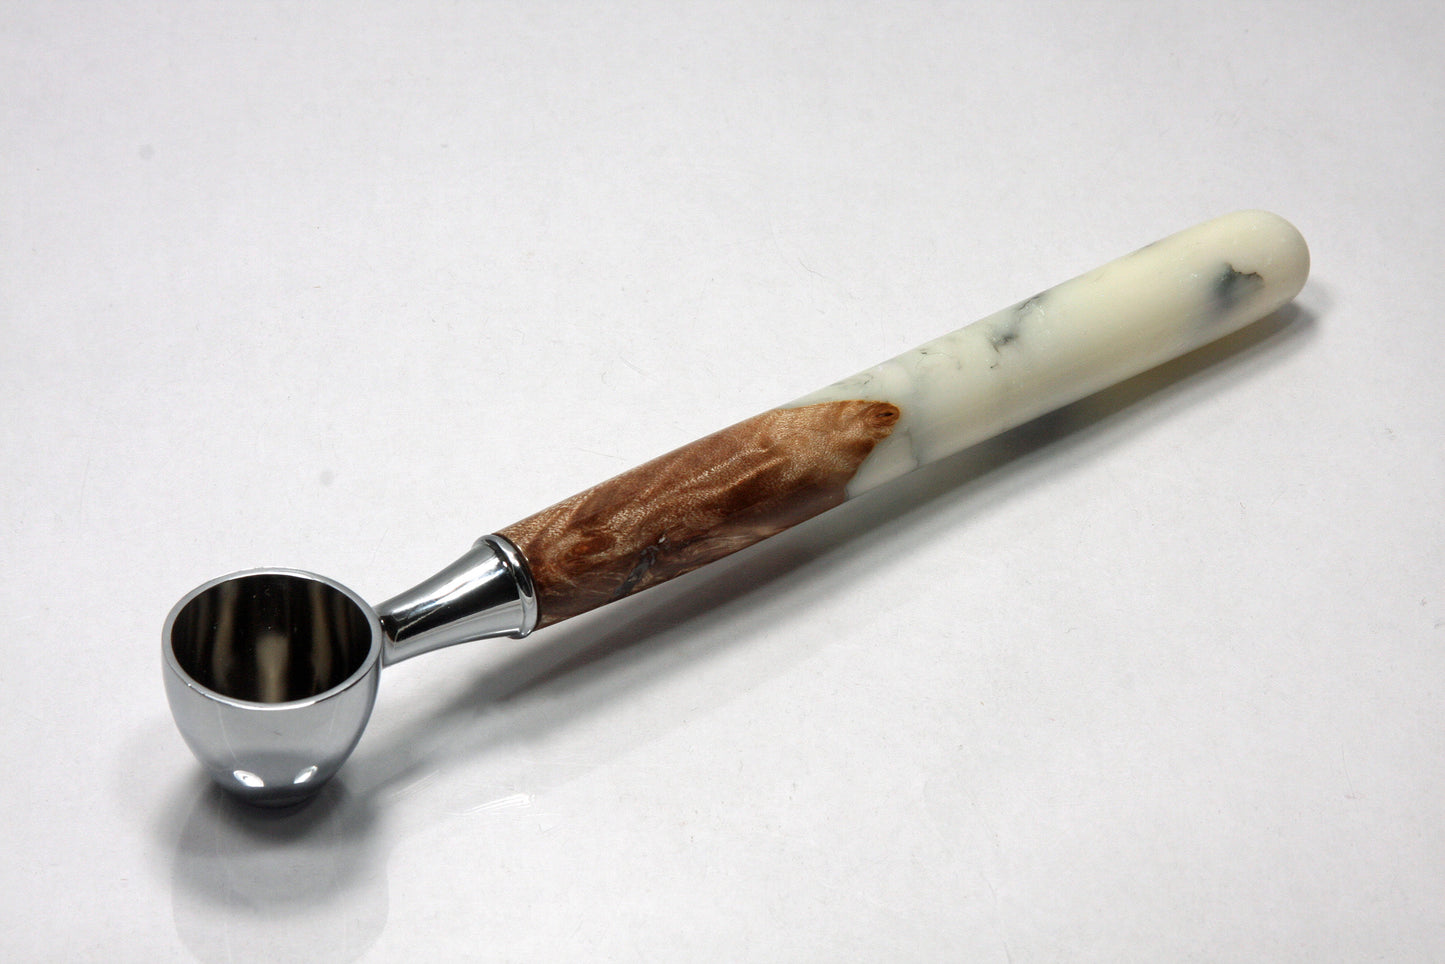 Handcrafted 1oz Coffee Scoop with Chrome-Plated Finish - Coffee Lover's Gift